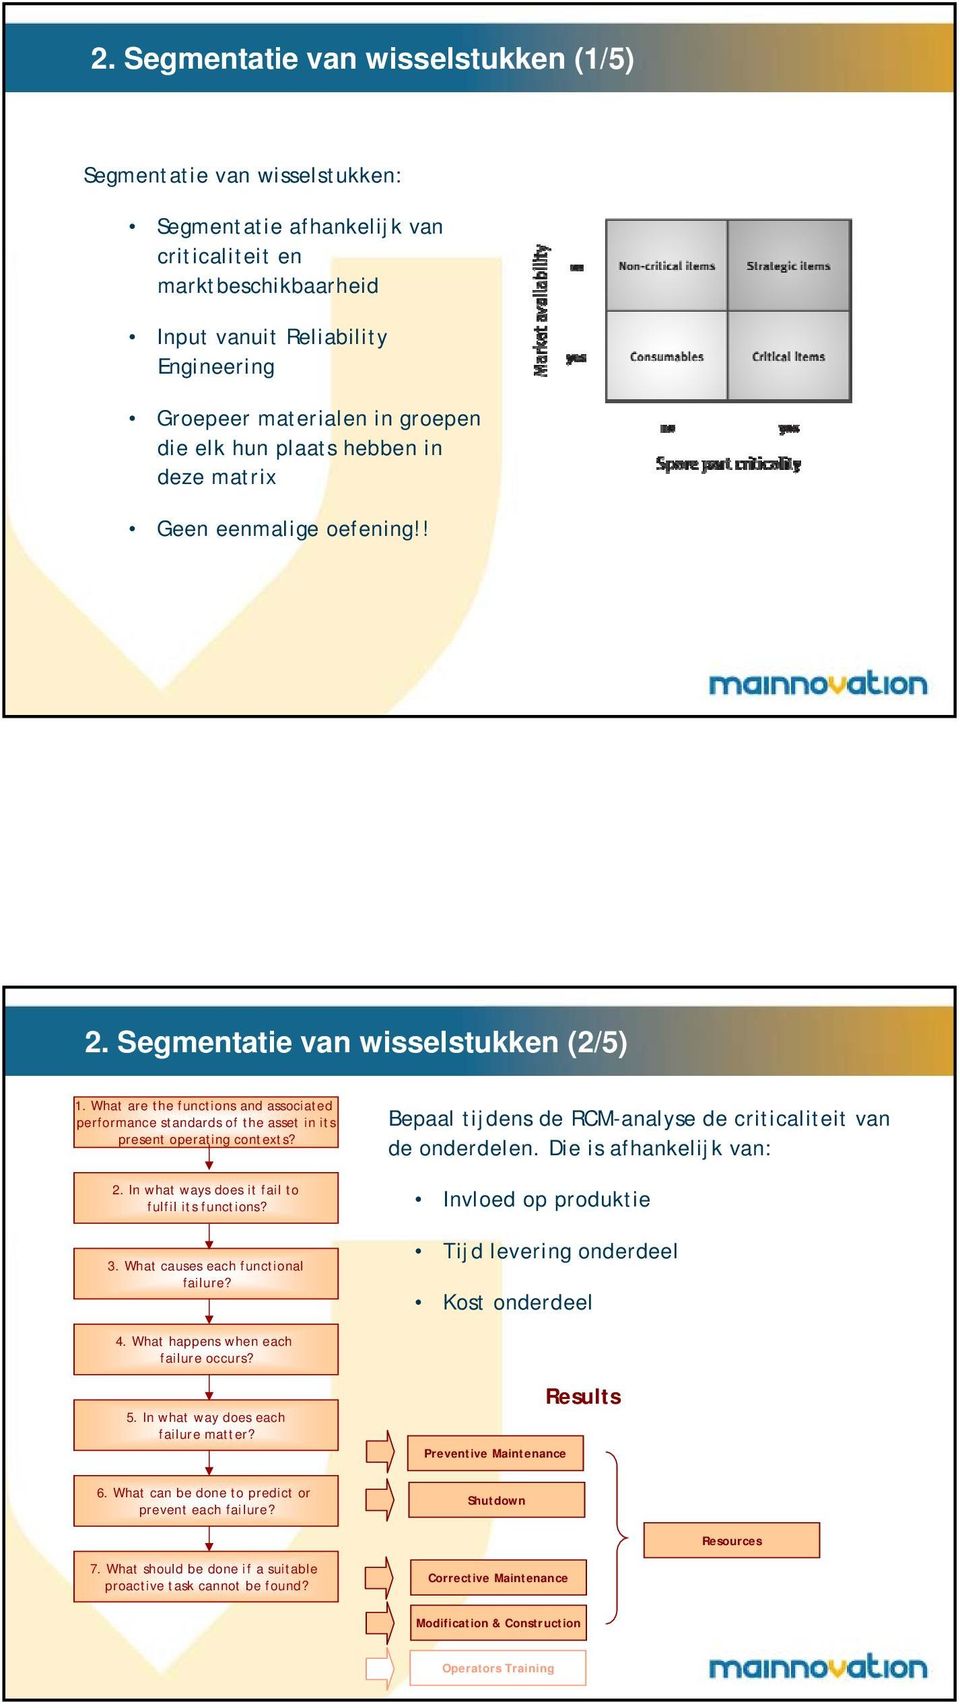 In what ways does it fail to fulfil its functions? 3. What causes each functional failure? Bepaal tijdens de RCM-analyse de criticaliteit van de onderdelen.